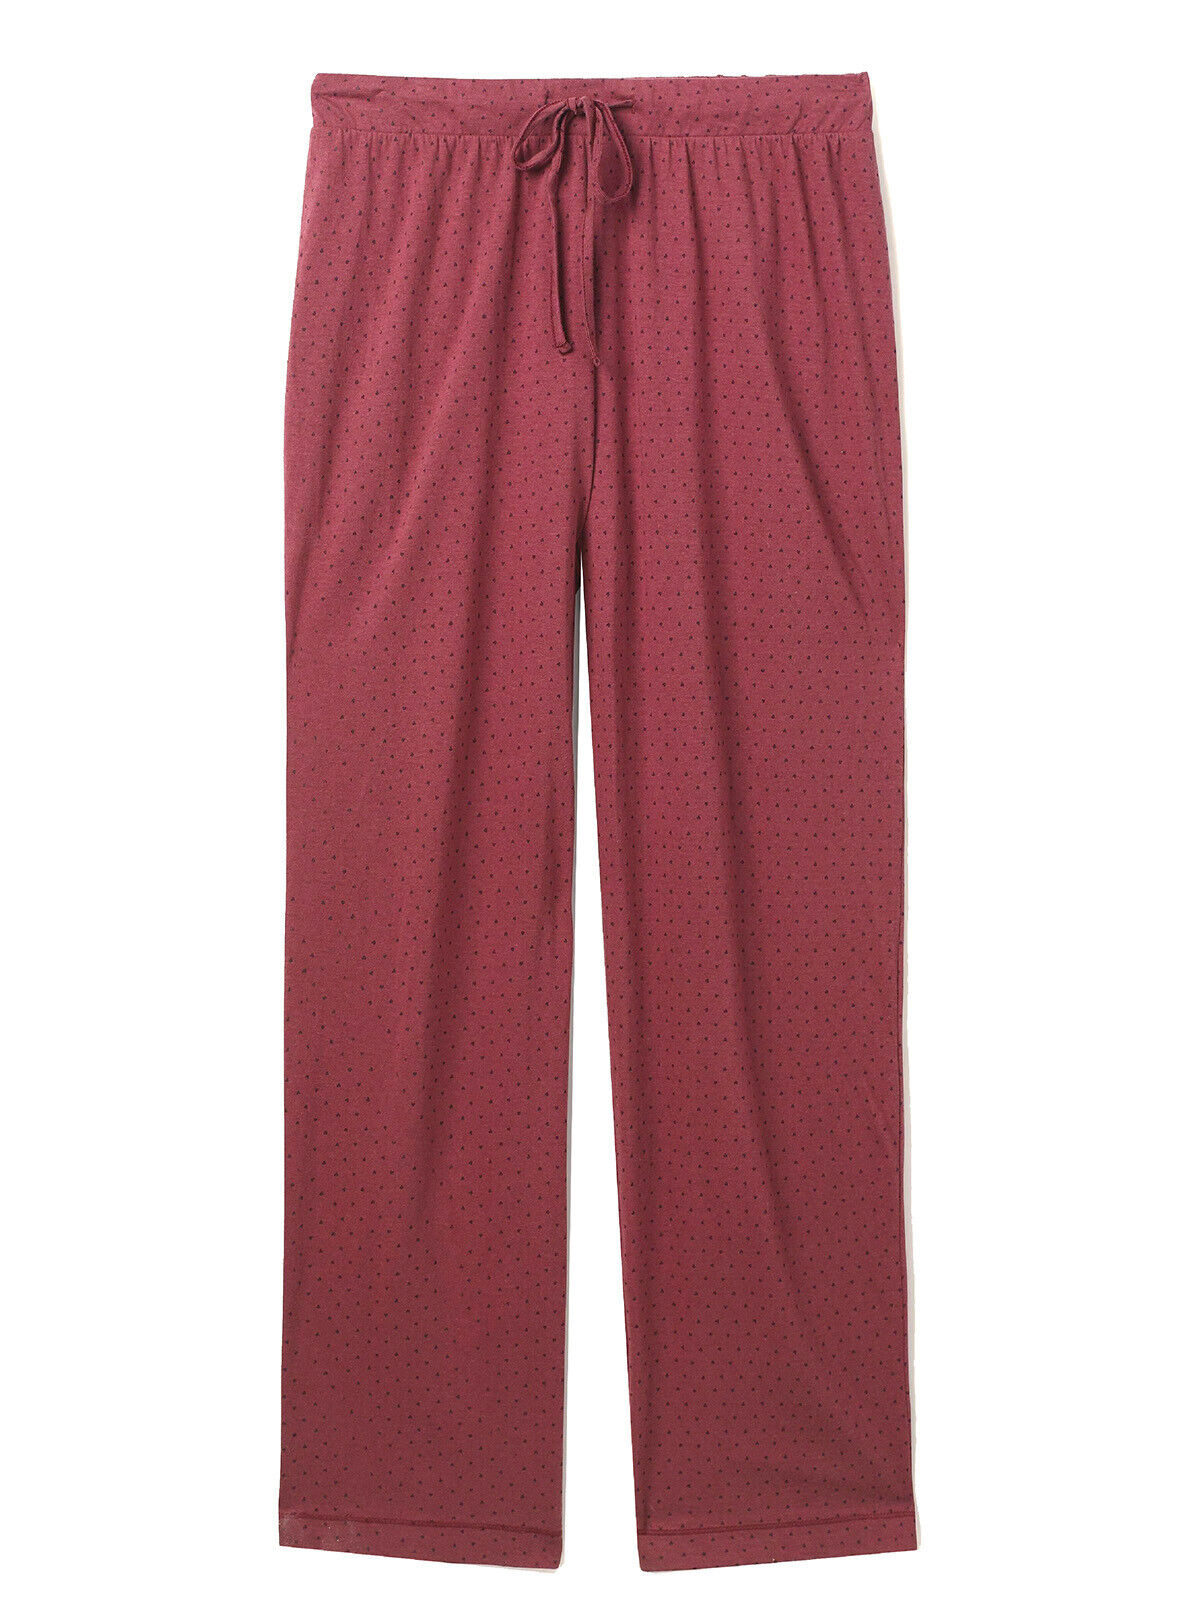 EX Fat Face Berry Mini Hearts Classic Lounge Pants in Size 10 RRP £32.50